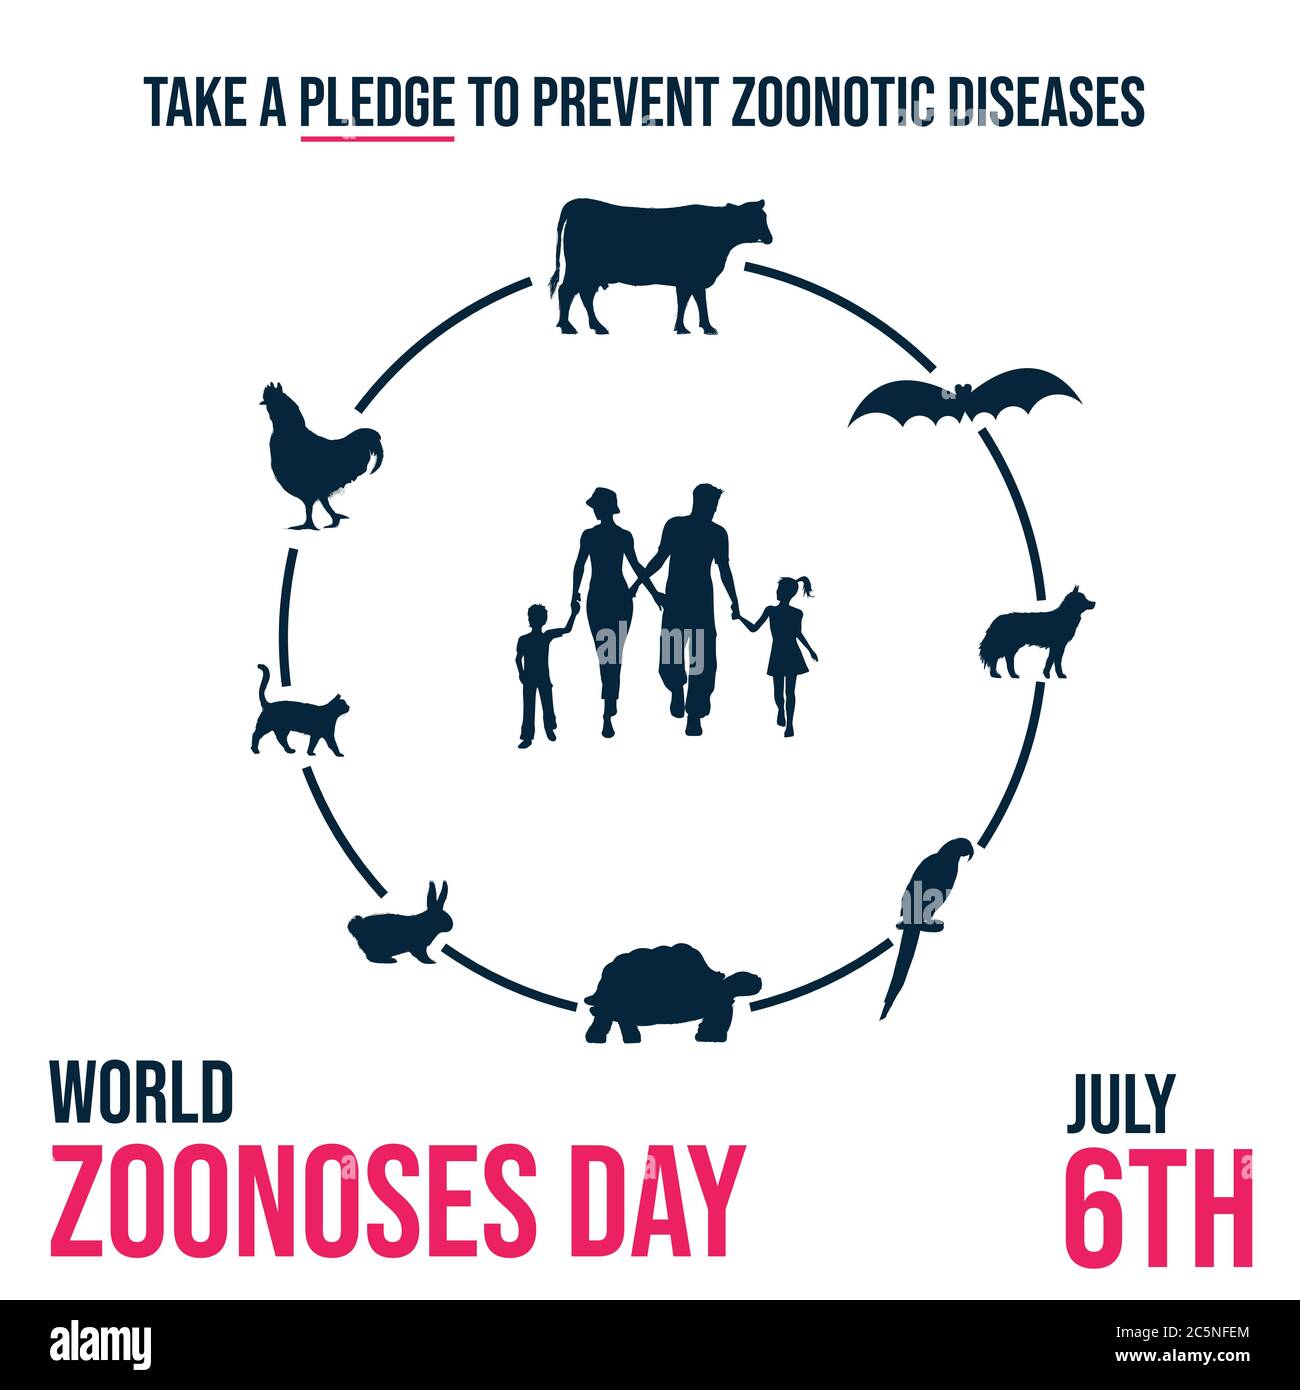 World Zoonoses Day, take a pledge to prevent zoonotic diseases poster for projects, illustration vector Stock Vector